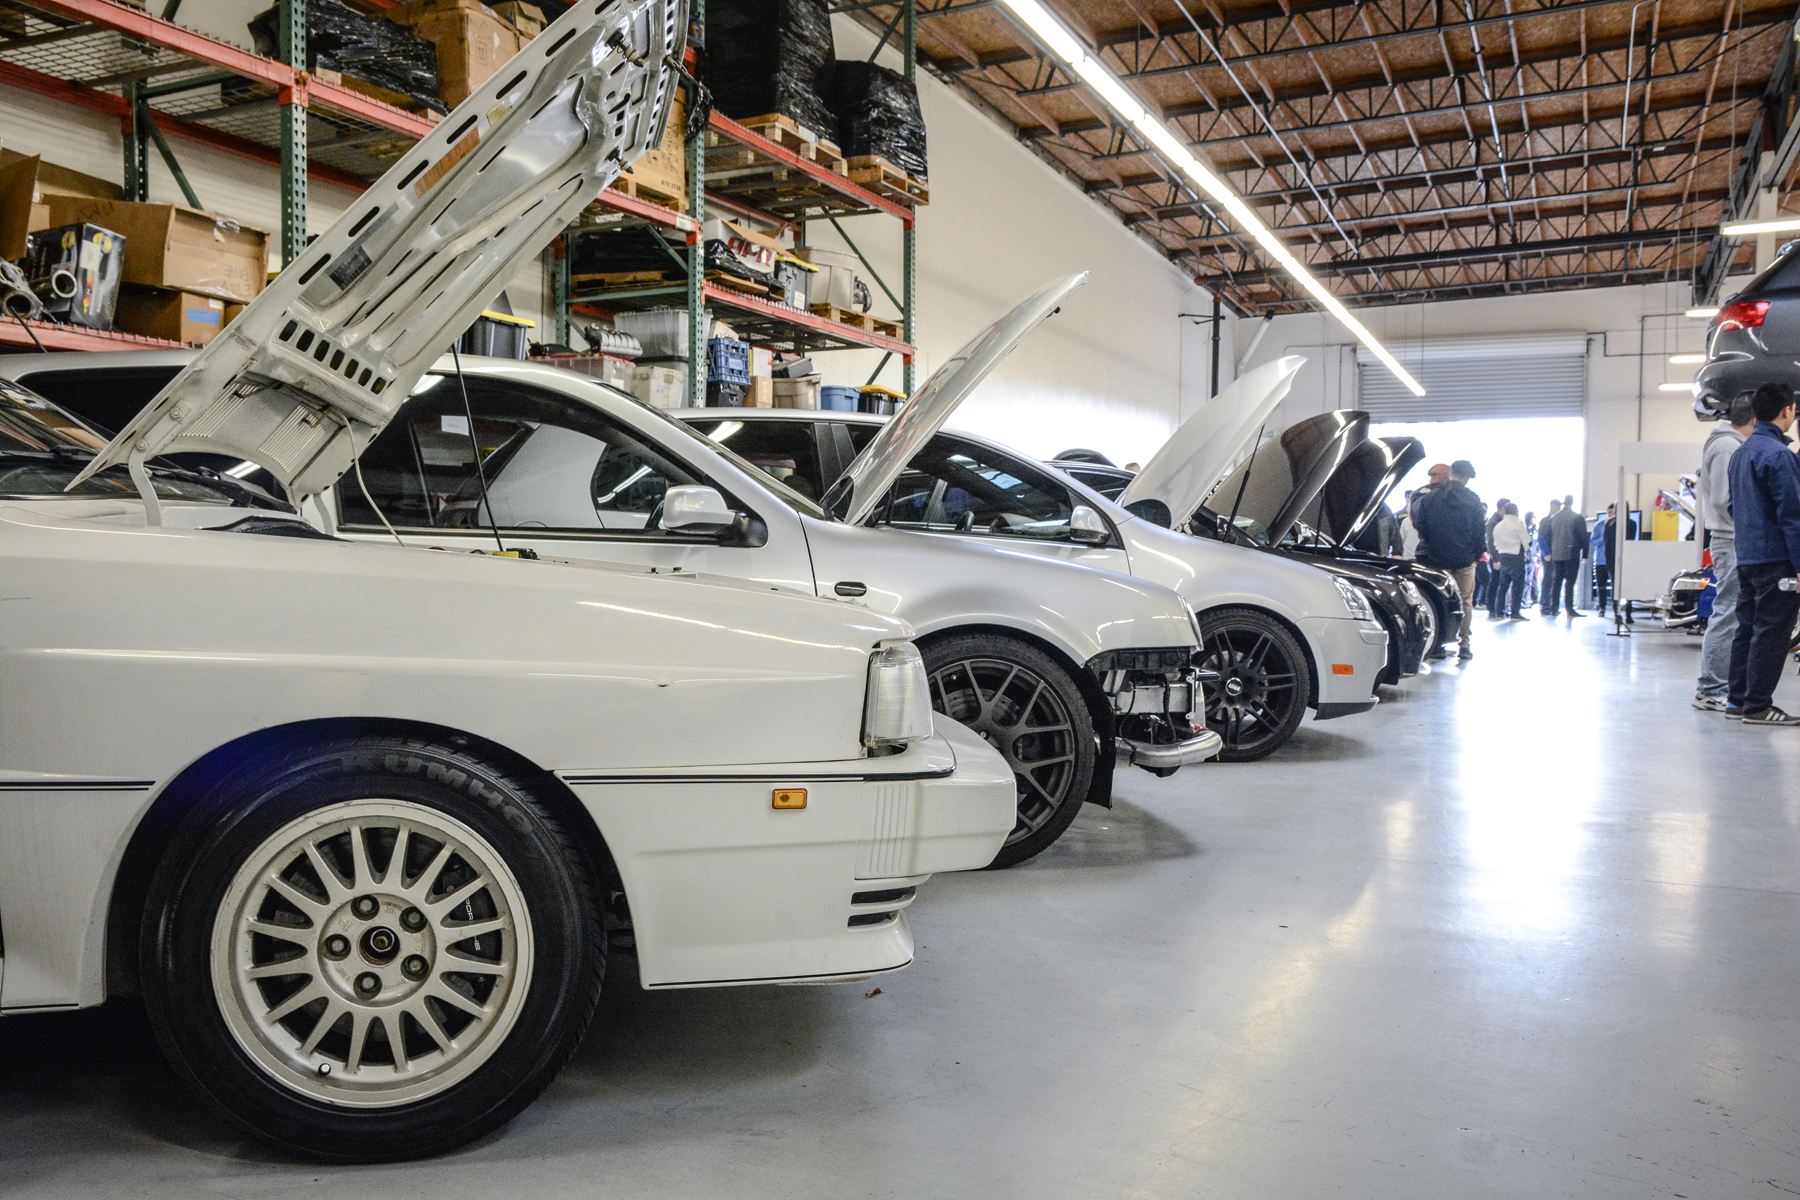 NorCal Audi Club's WinterFest 2016 Get-Together - Hosted by 034Motorsport